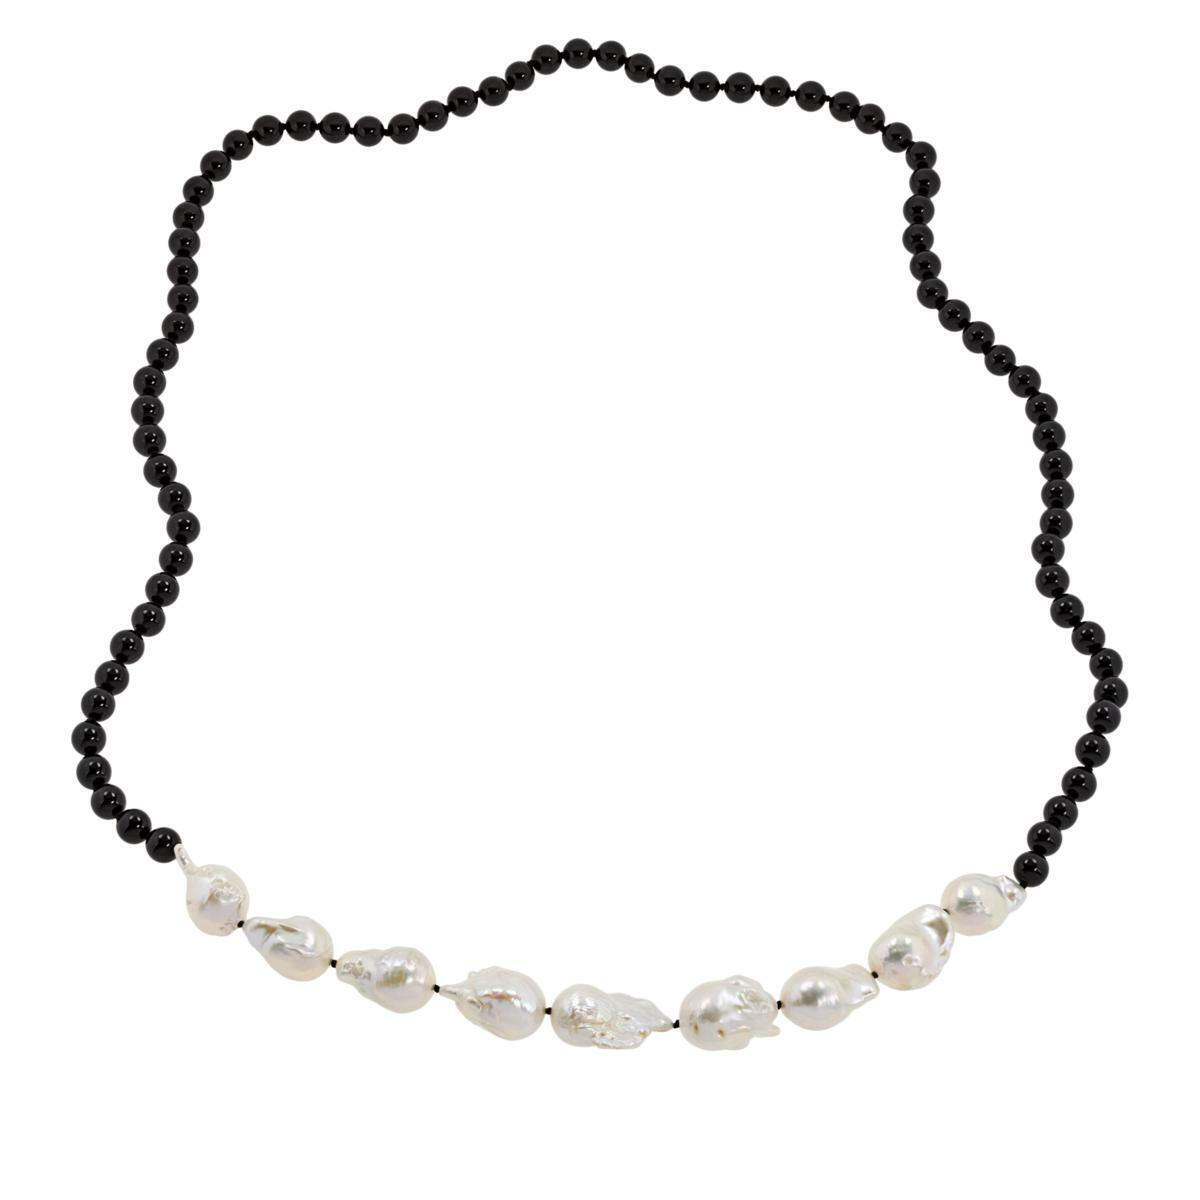 Colleen Lopez 34" Baroque Cultured Pearl and Black Gemstone Bead Necklace